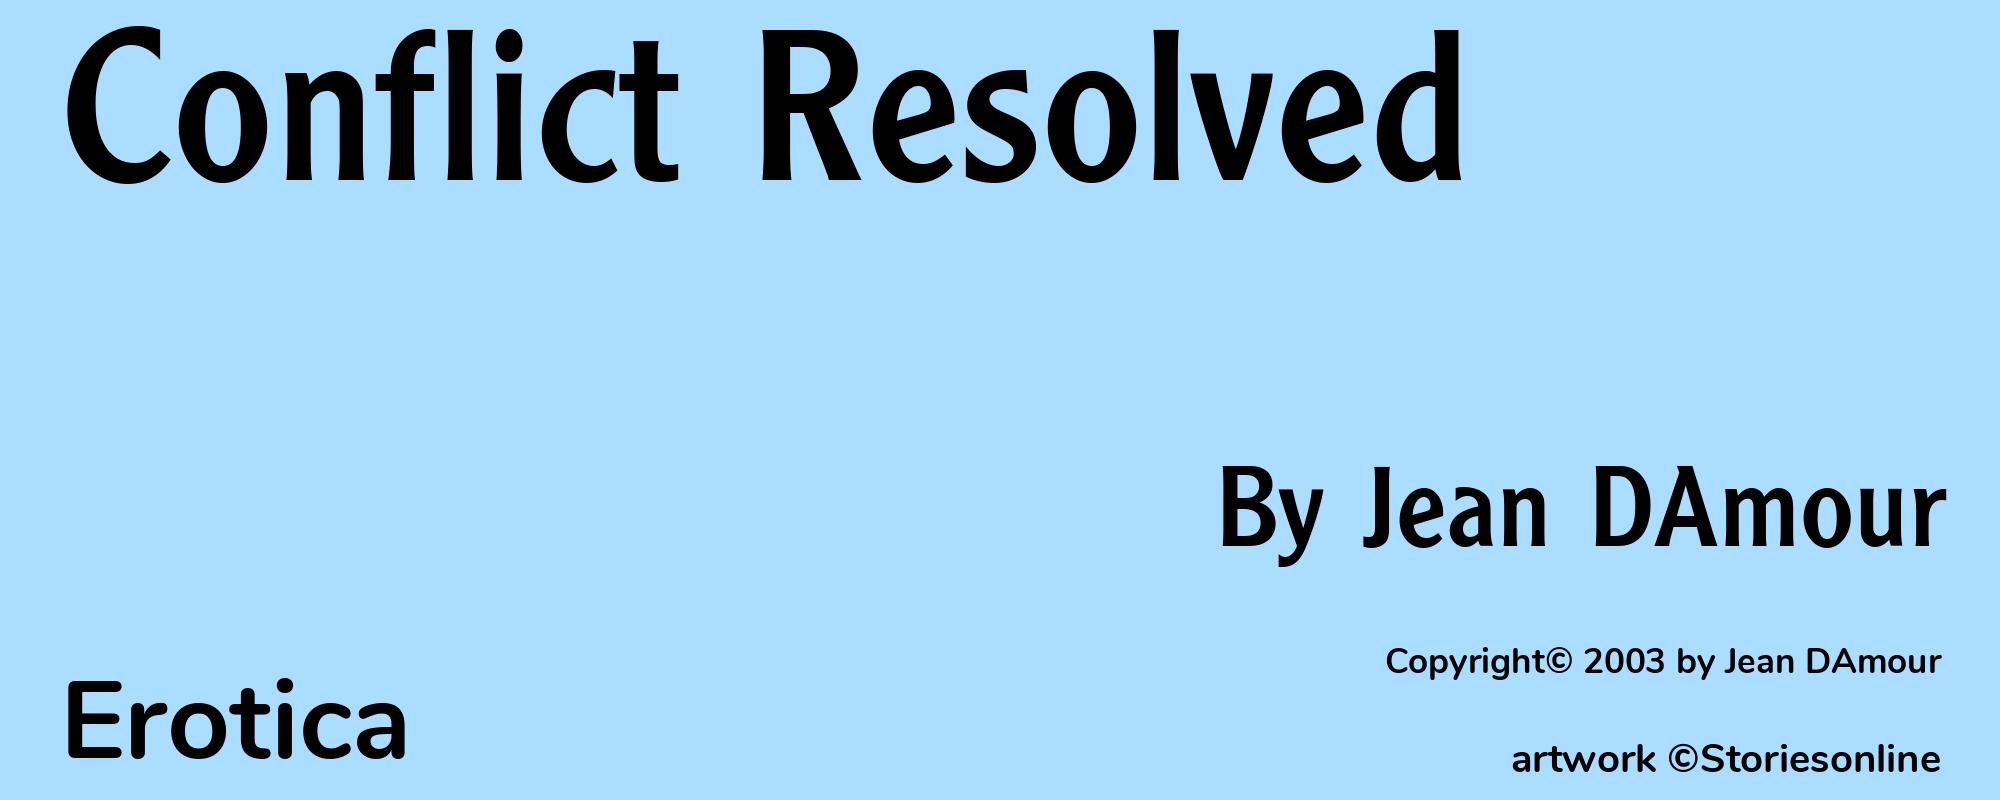 Conflict Resolved - Cover